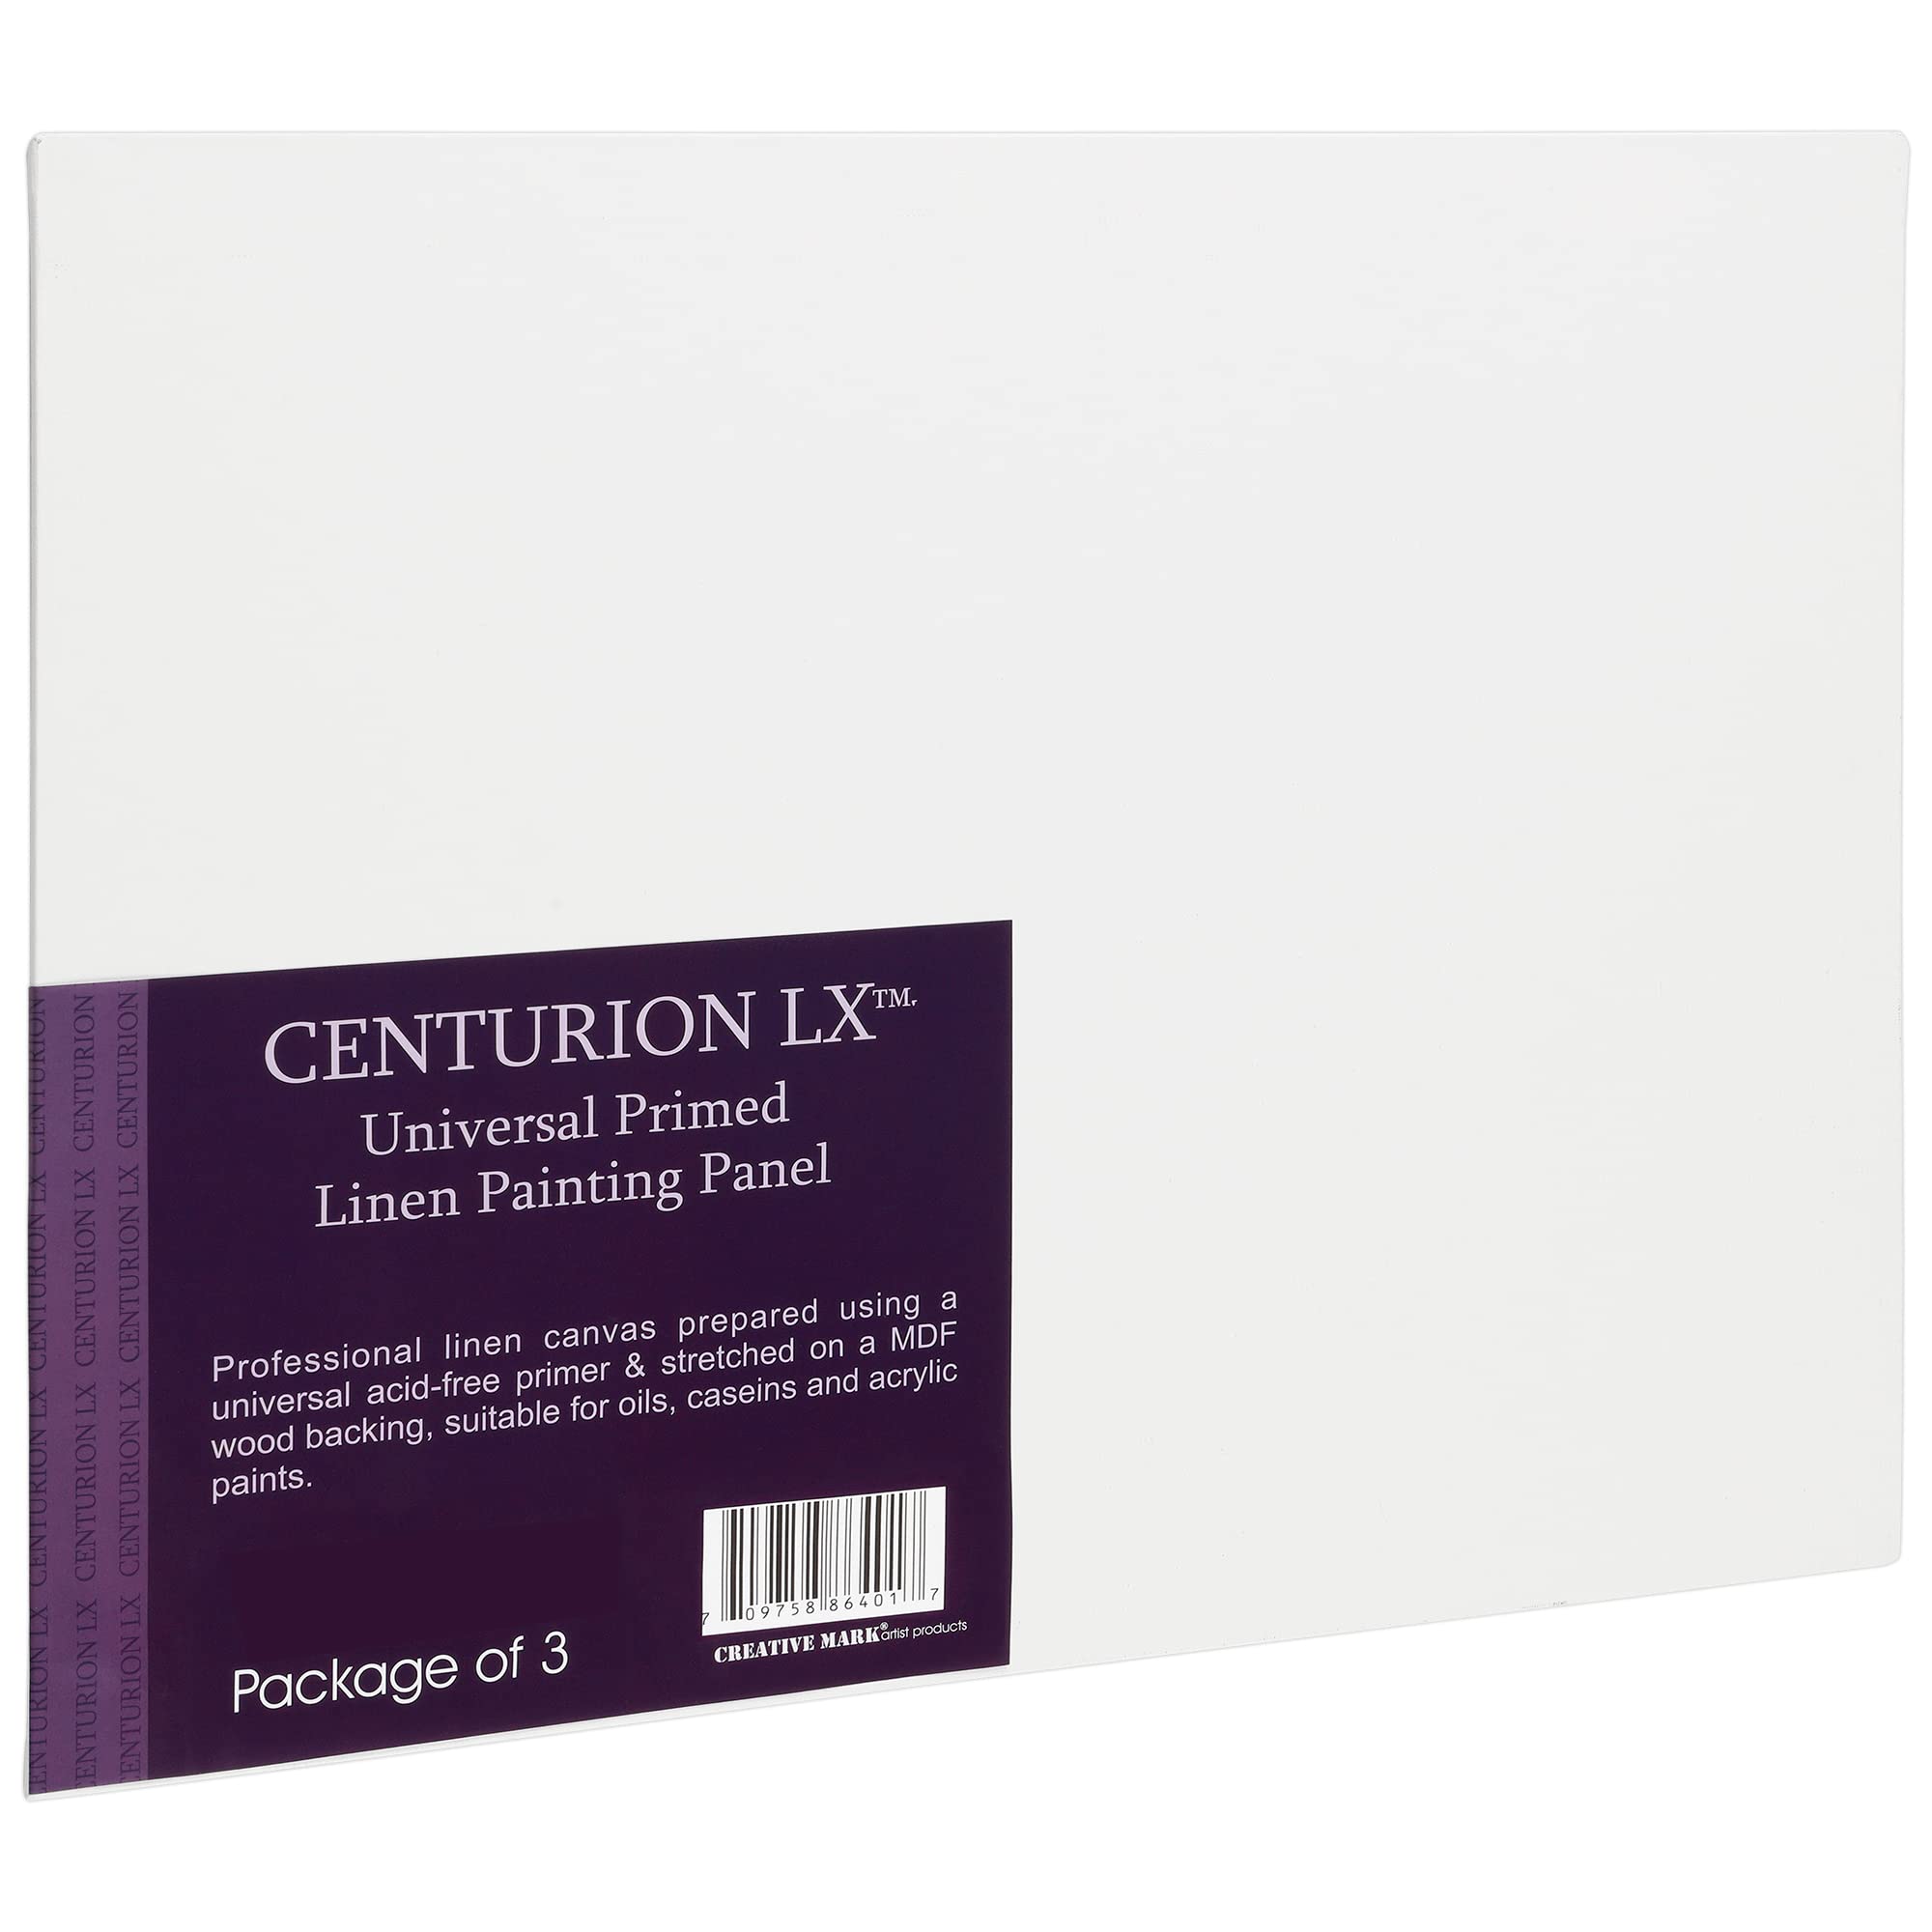 Centurion All-Media Primed Linen Panels - 8x10 3 Pack - 11oz Universal Primed Canvas Boards for Painting, Mounted on MDF Wood, Non-Warping, Ideal for Artists, Professionals, Painters, Students